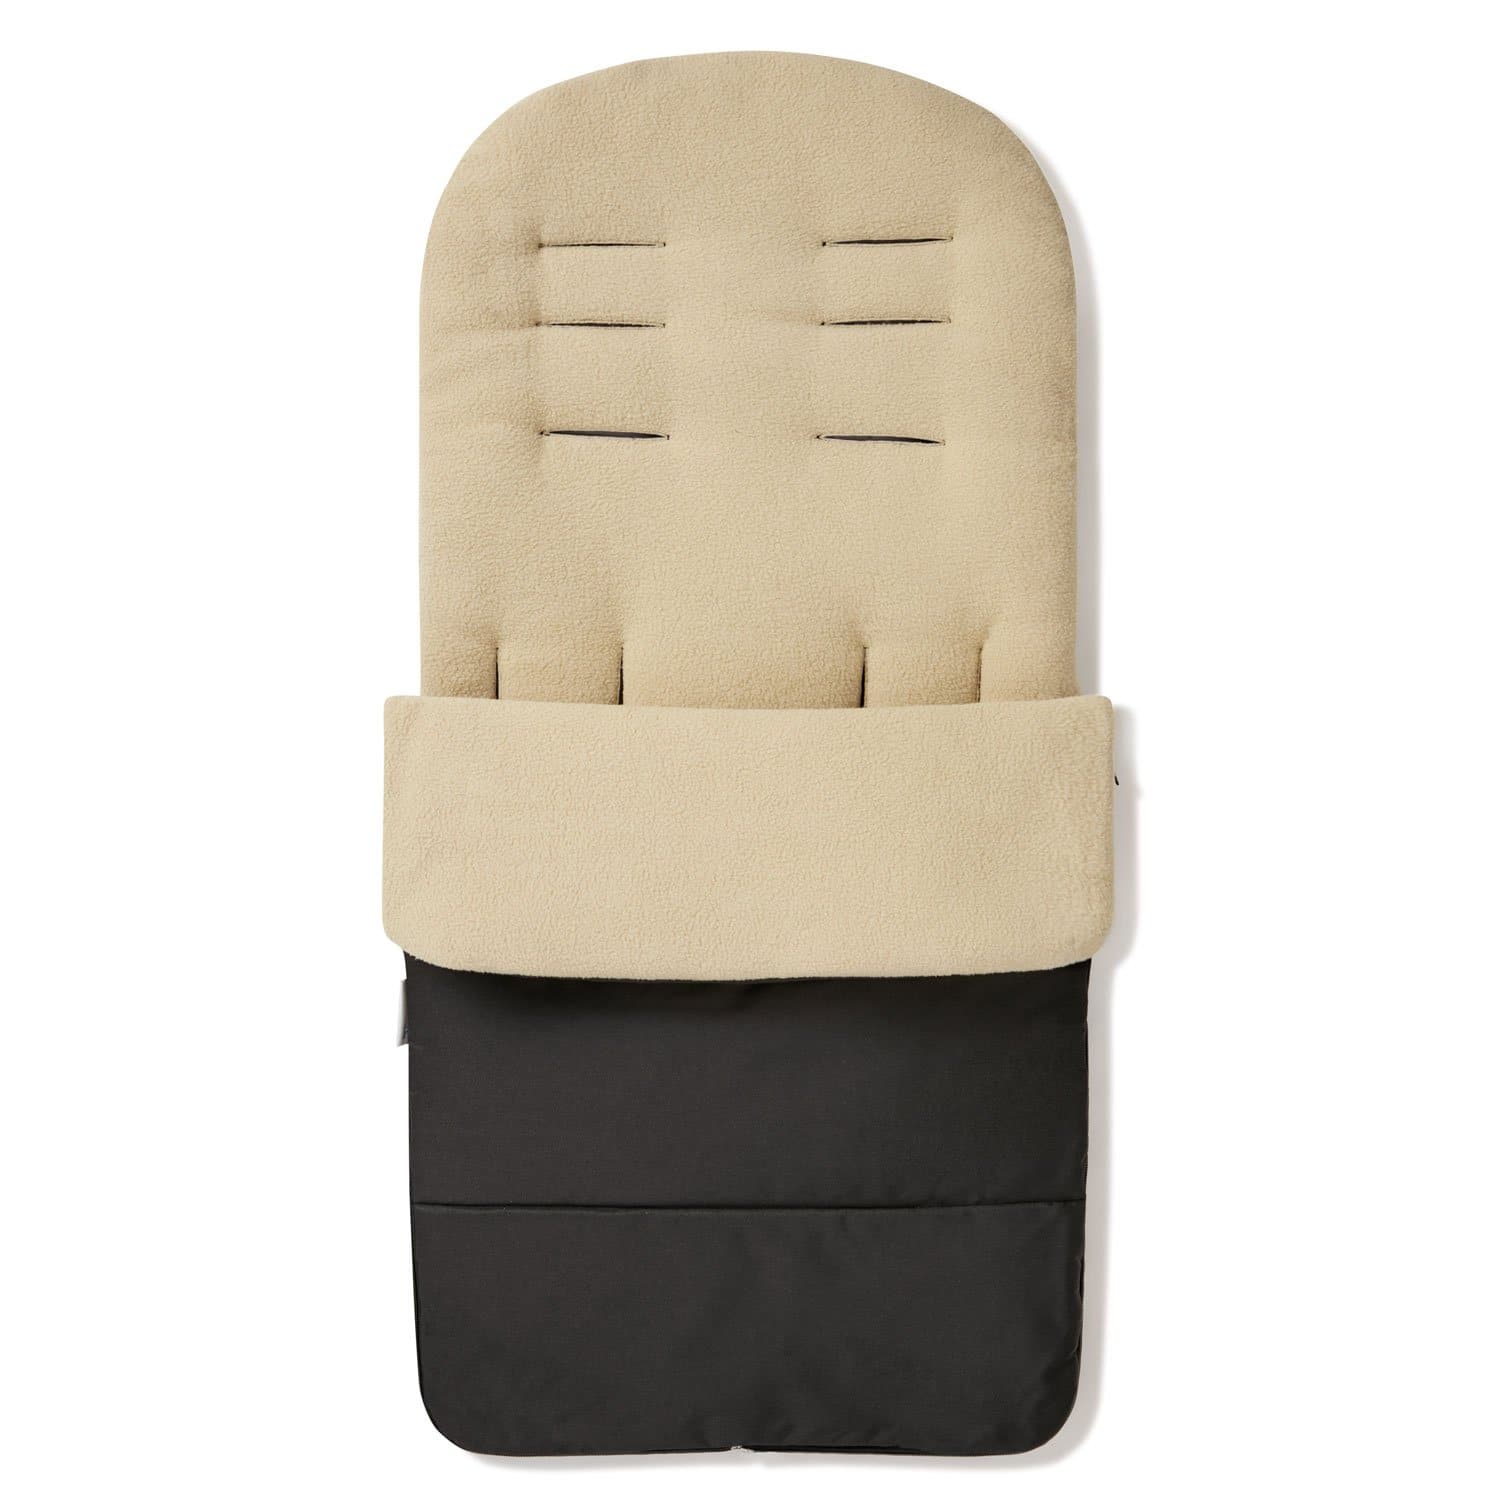 Premium Footmuff / Cosy Toes Compatible with Seed - Desert Sand / Fits All Models | For Your Little One